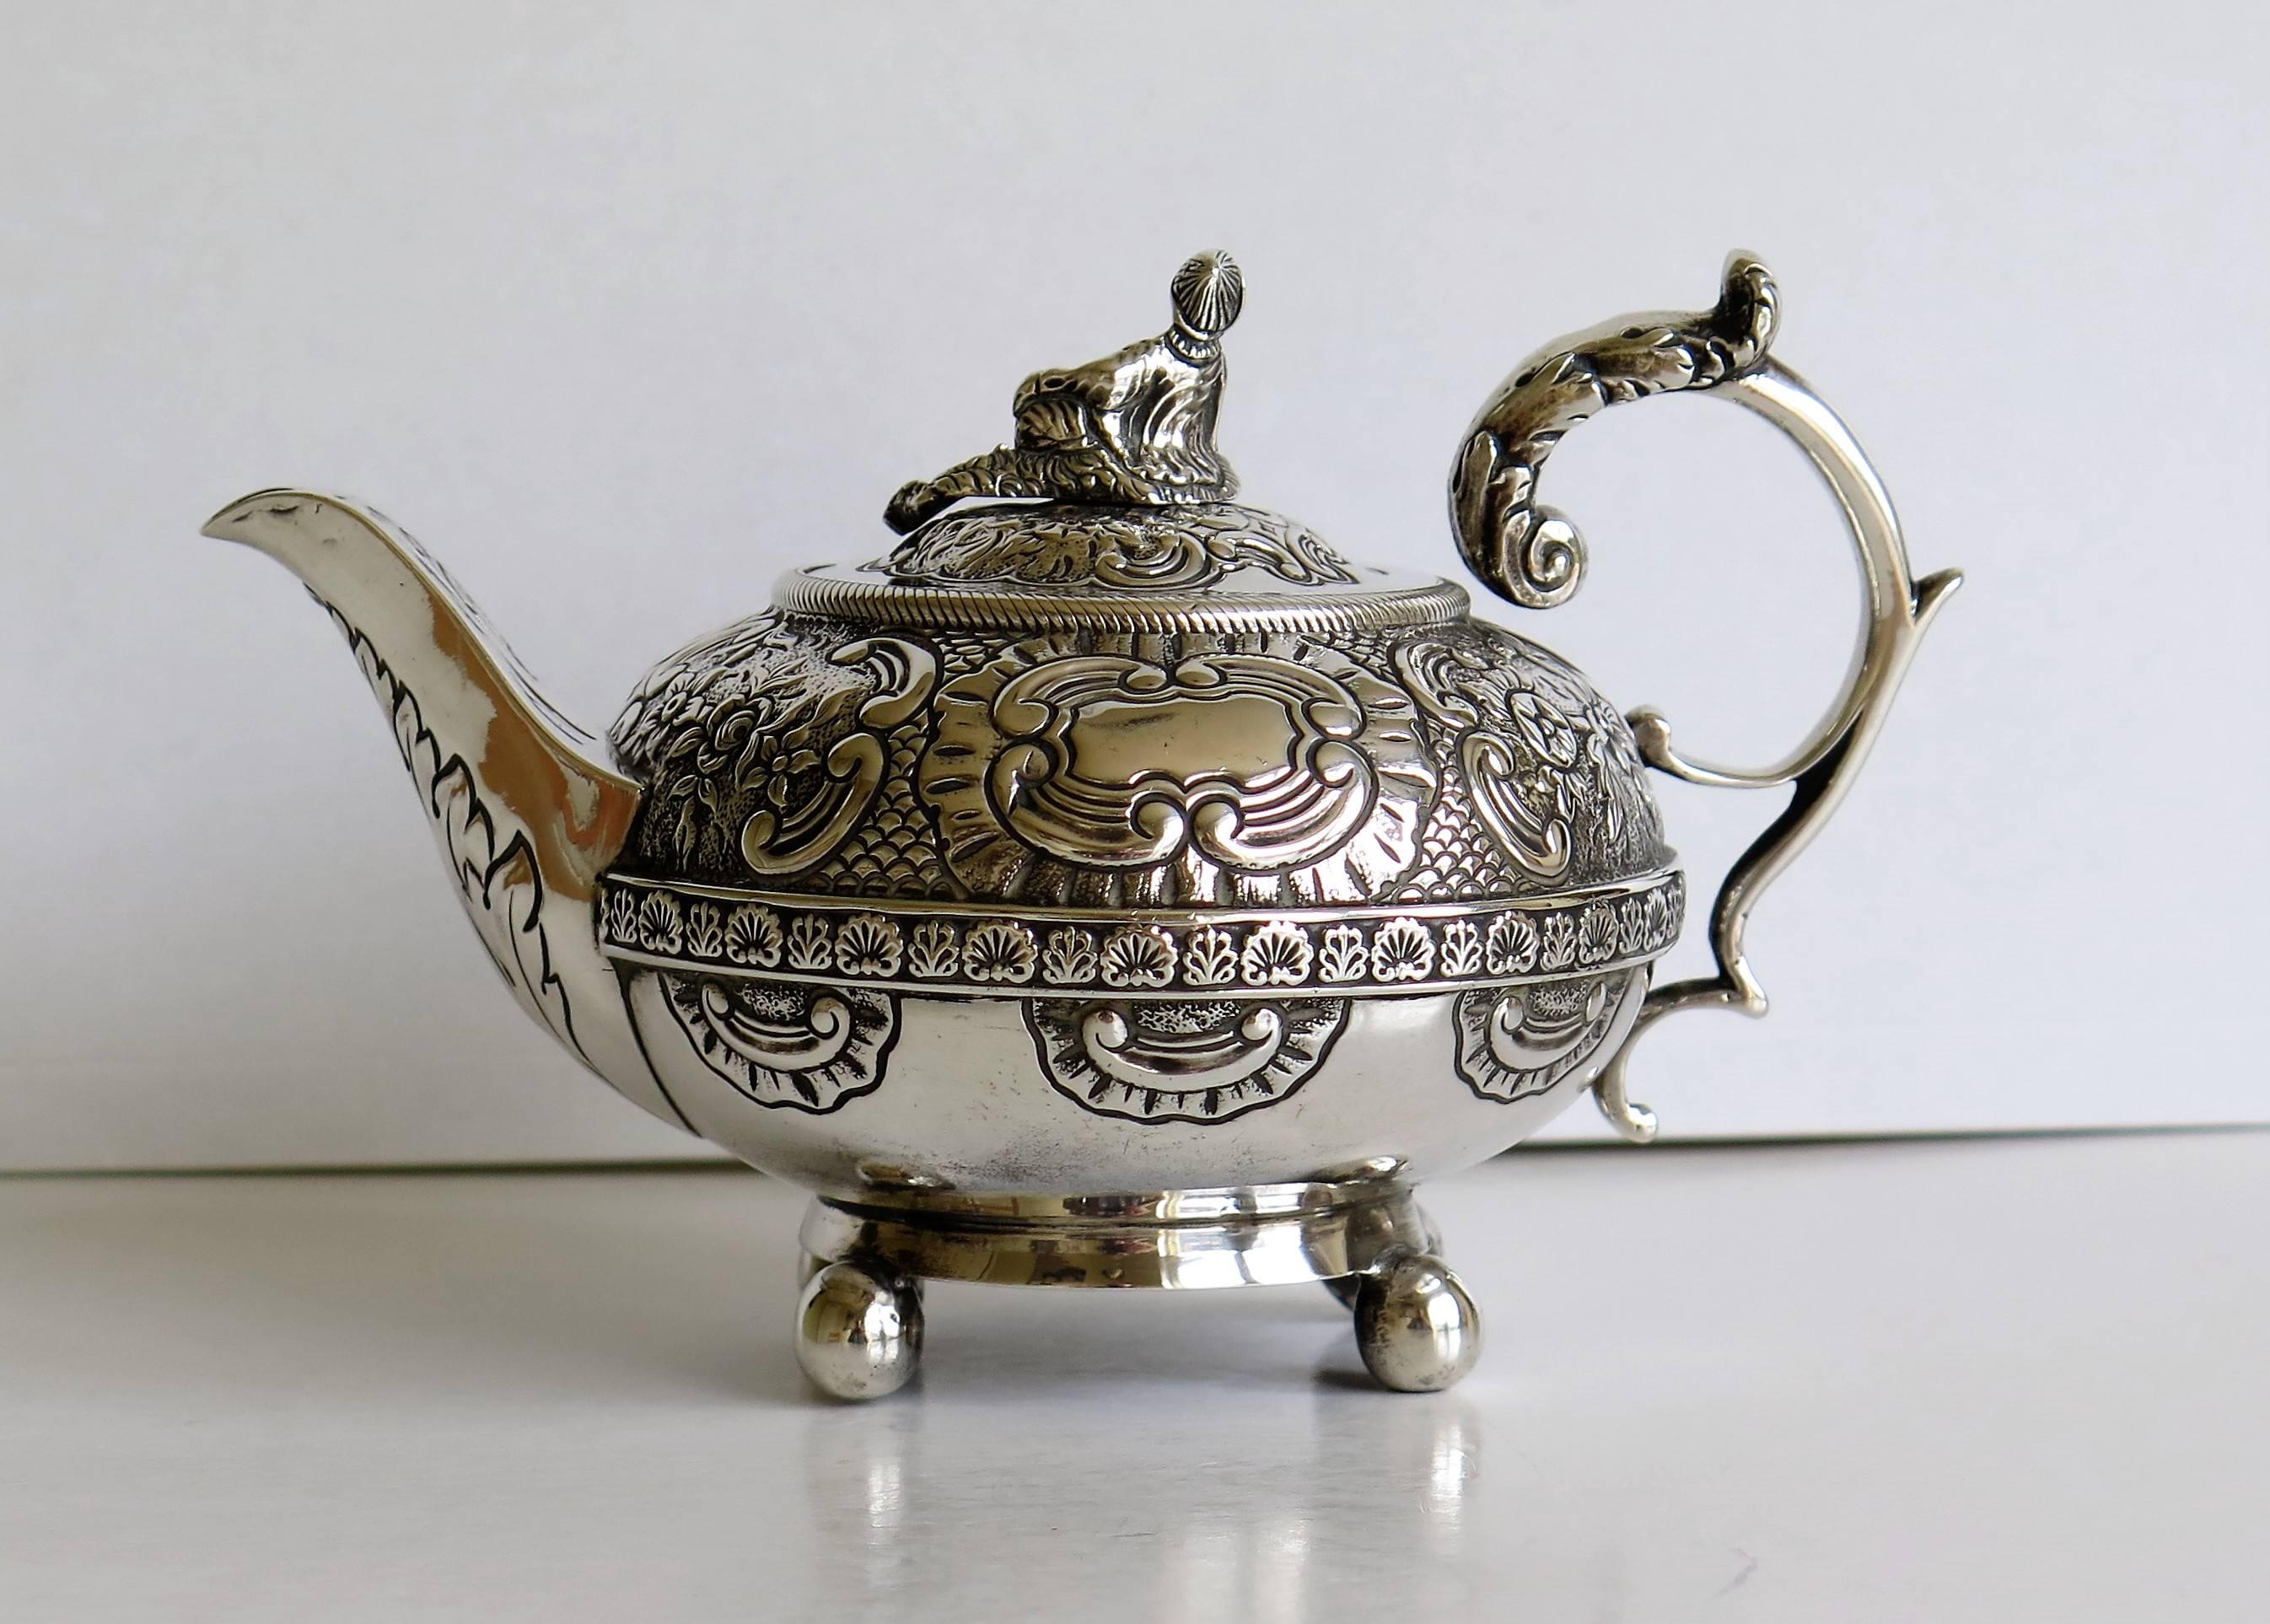 This is a fine quality Bachelors teapot in solid Sterling Silver, beautifully hand chased and dating to the late Georgian period of George 111rd, 1817.

The teapot has a circular compressed form, supported by four small ball feet. It has a solid